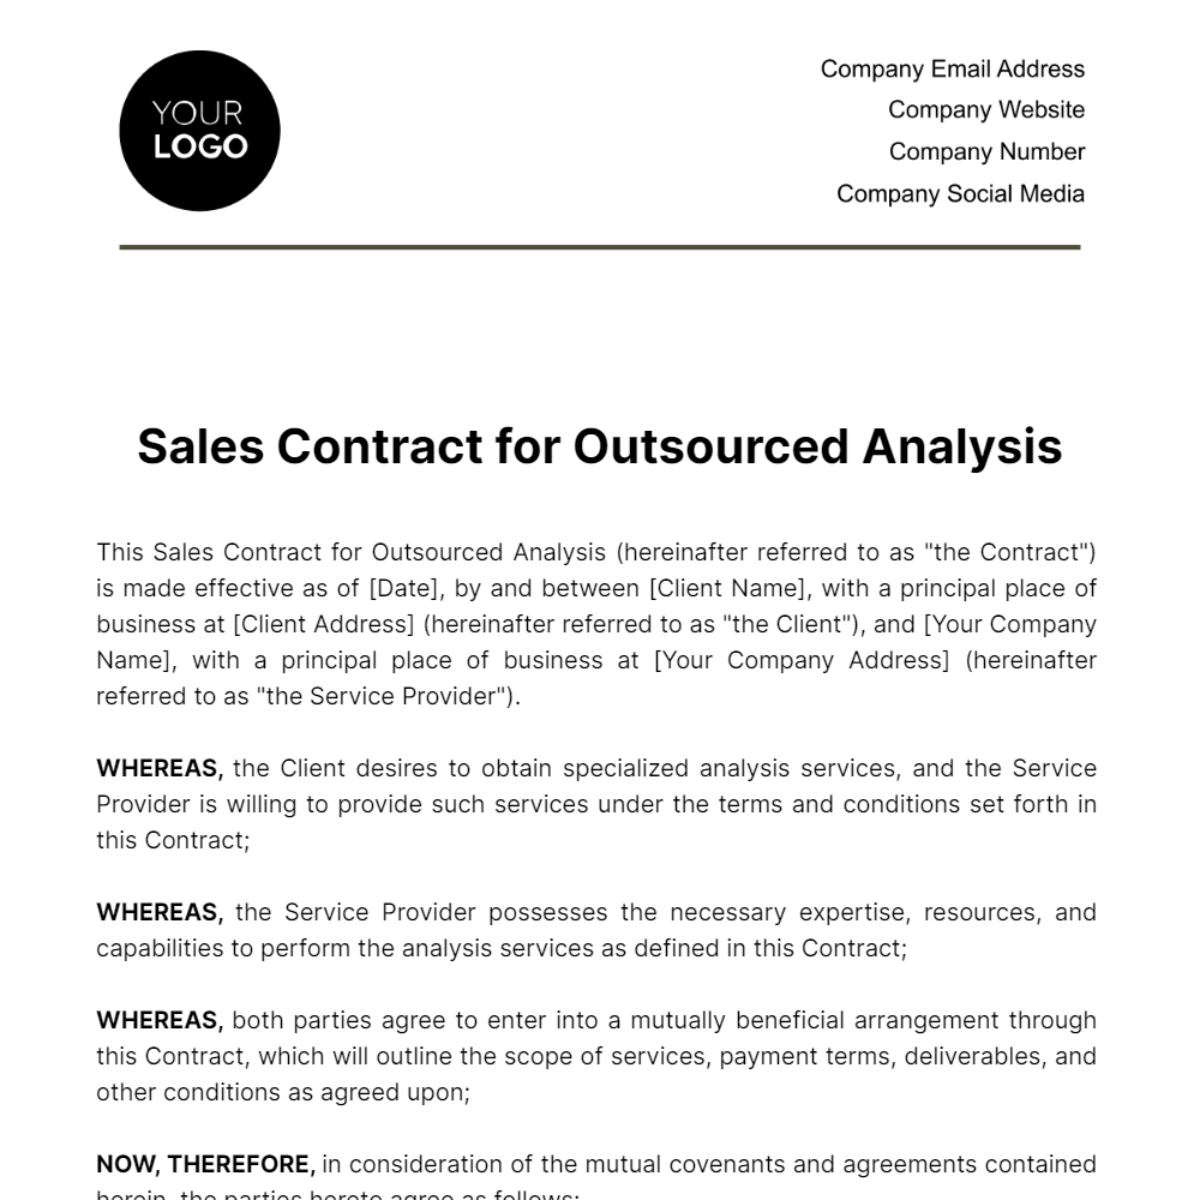 Free Sales Contract for Outsourced Analysis Template